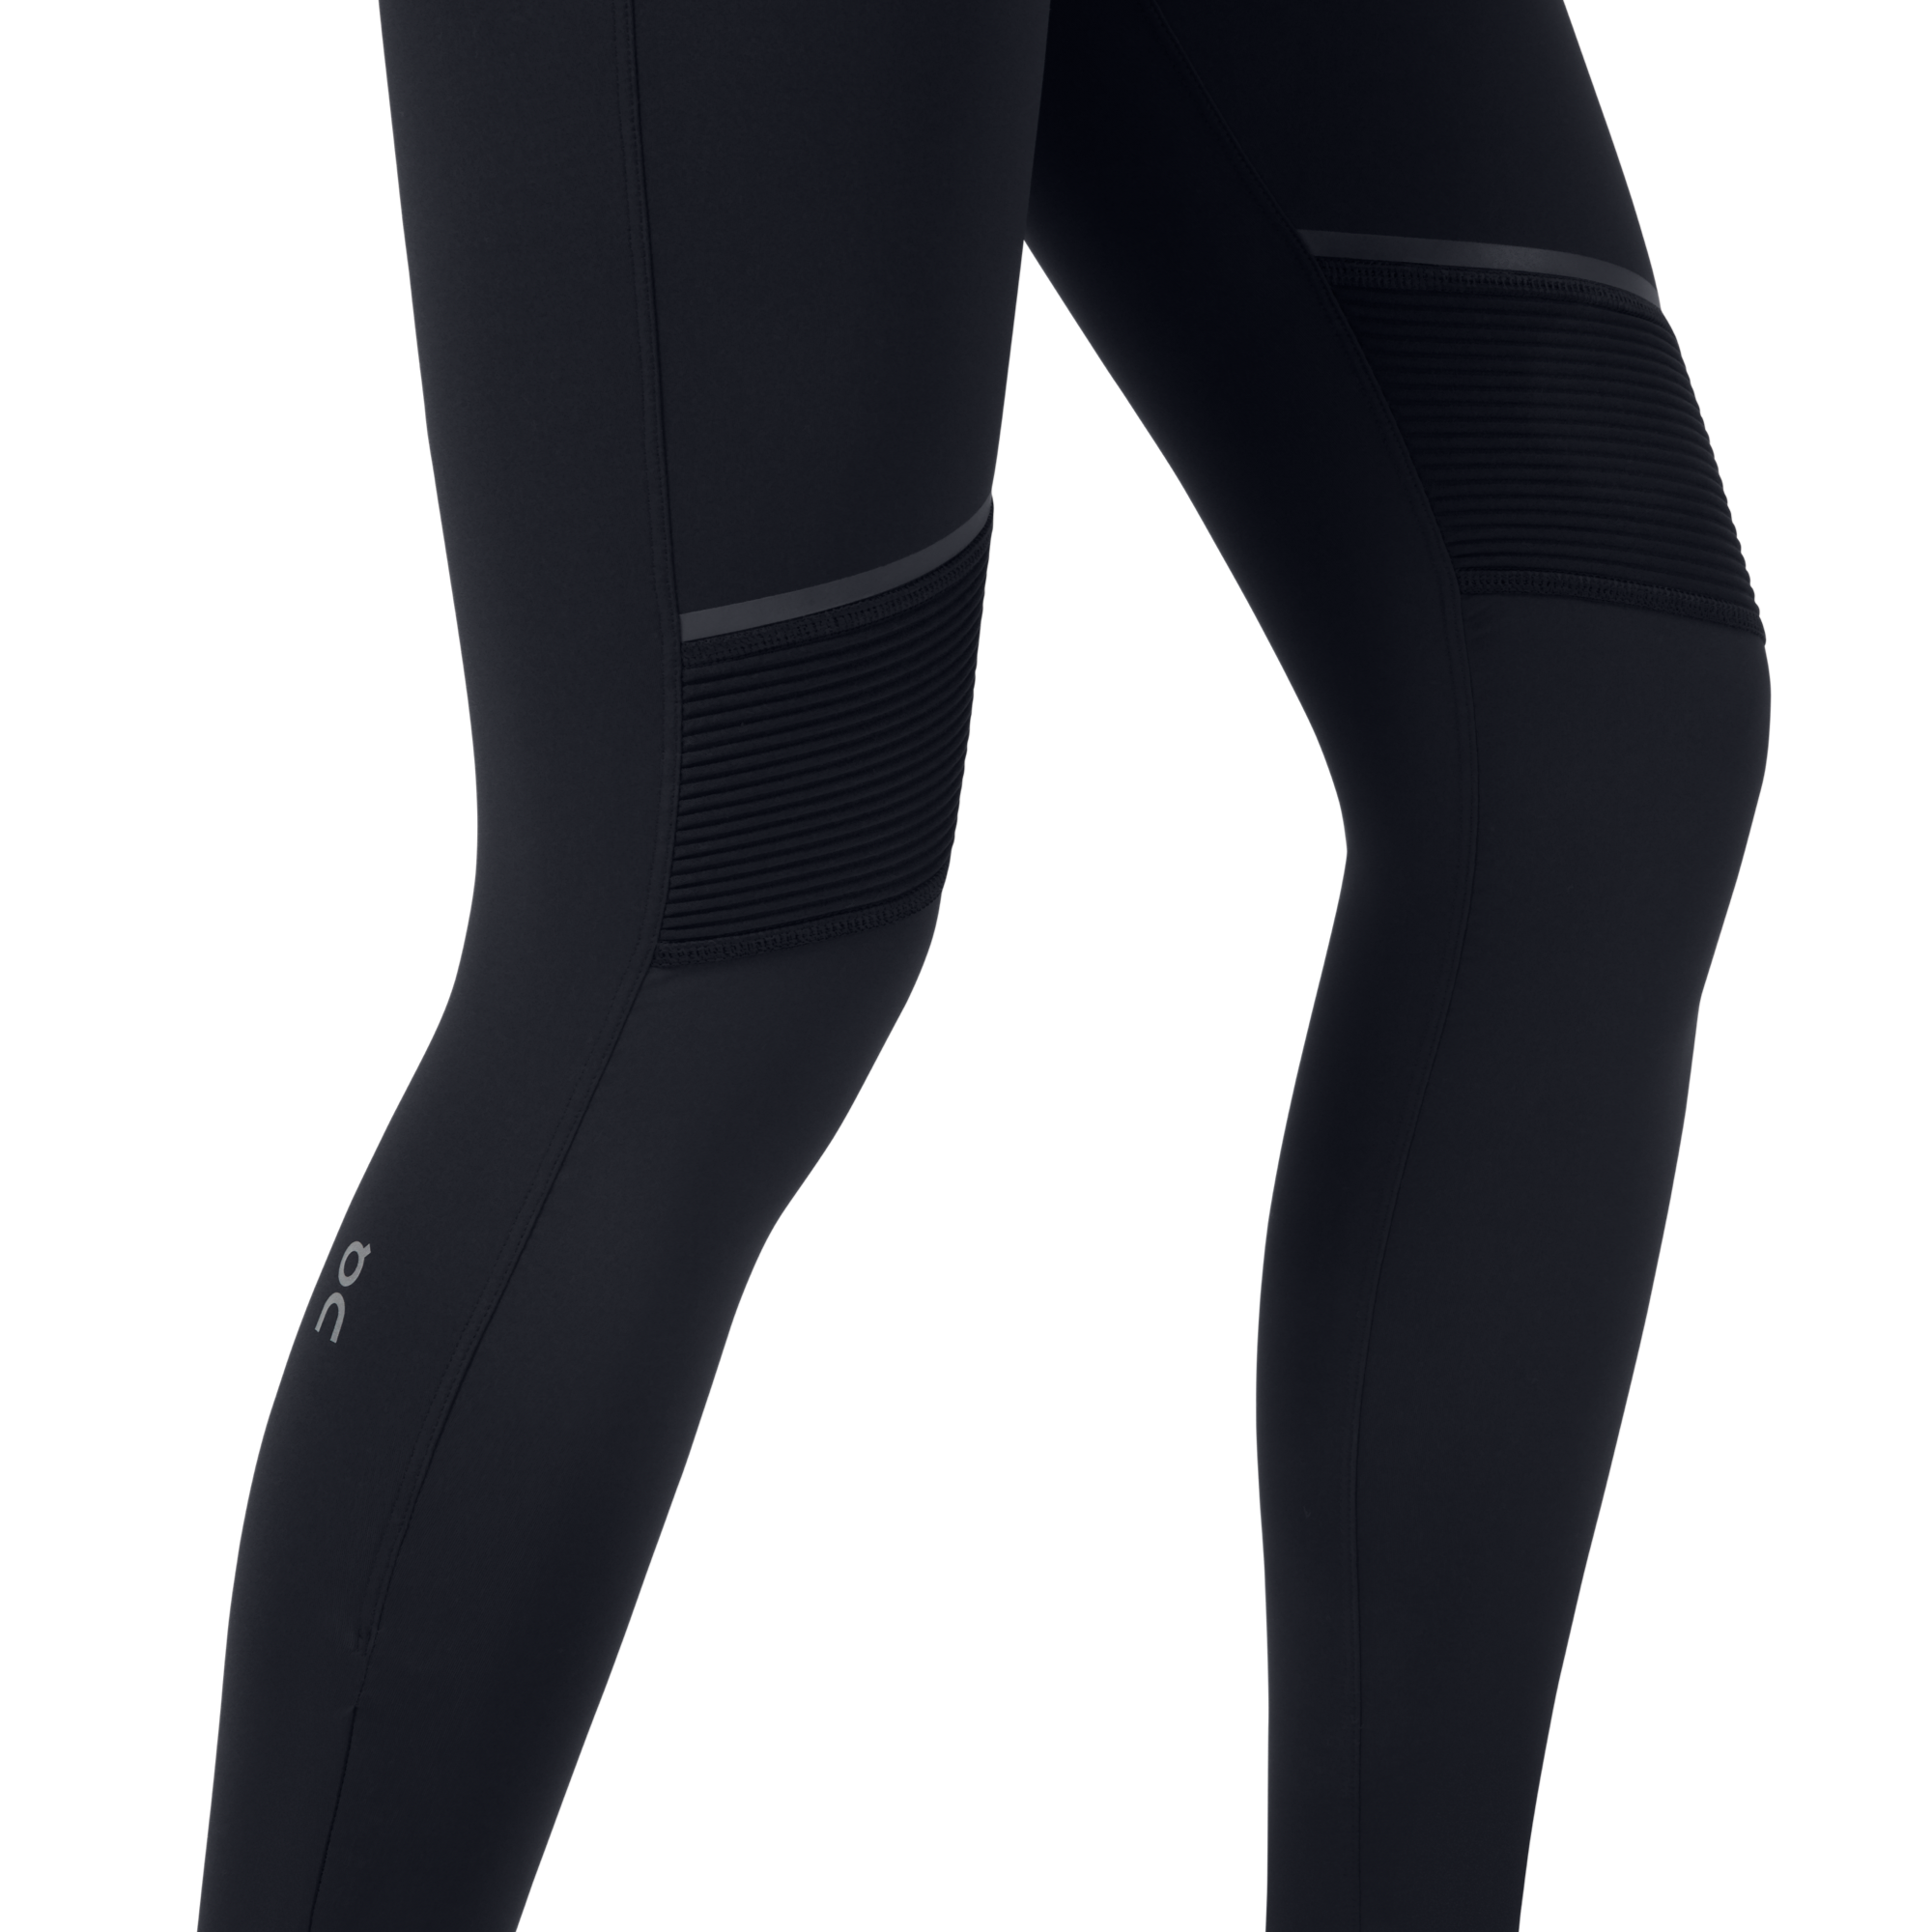  Ultimate Direction Women's Hydro Performance Running Tights  Leggings with Pockets, Water Bottles Inlcuded Onyx : Sports & Outdoors